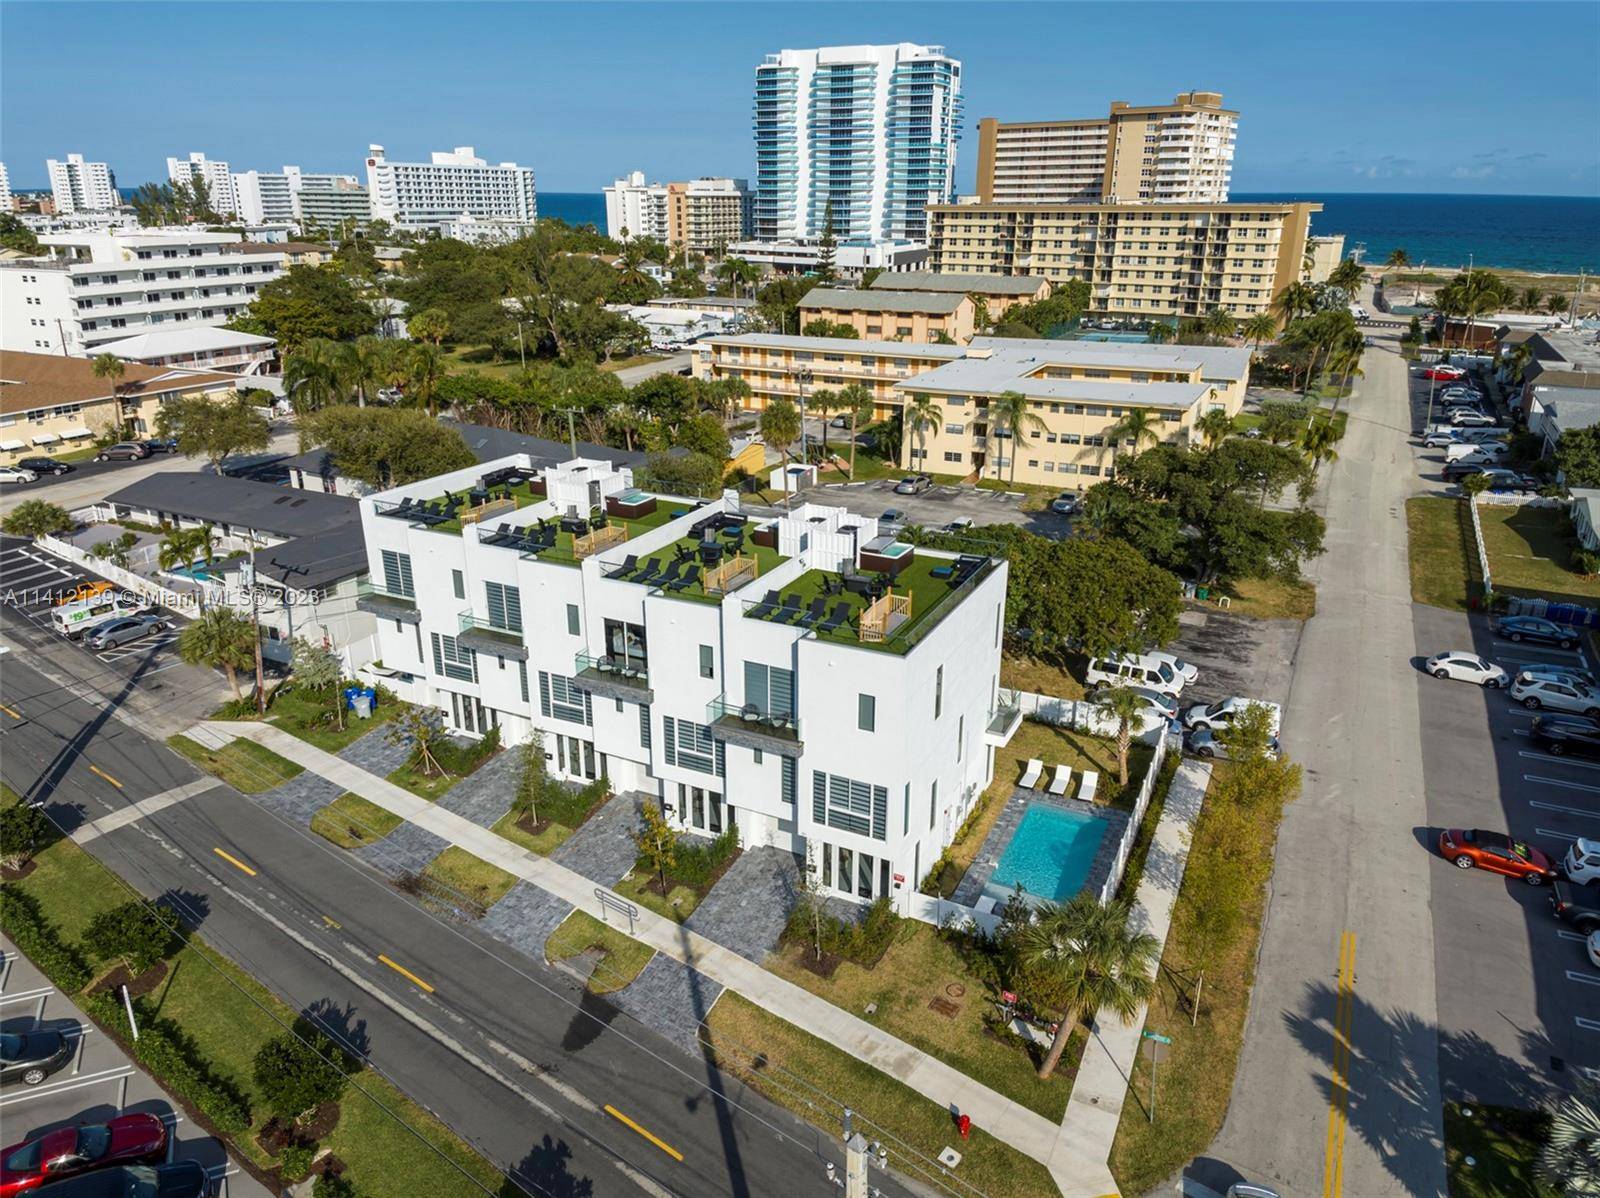 Luxury meets beachside living in this stunning 4 unit townhomes, perfectly situated just one block away from the renowned Pompano Beach.